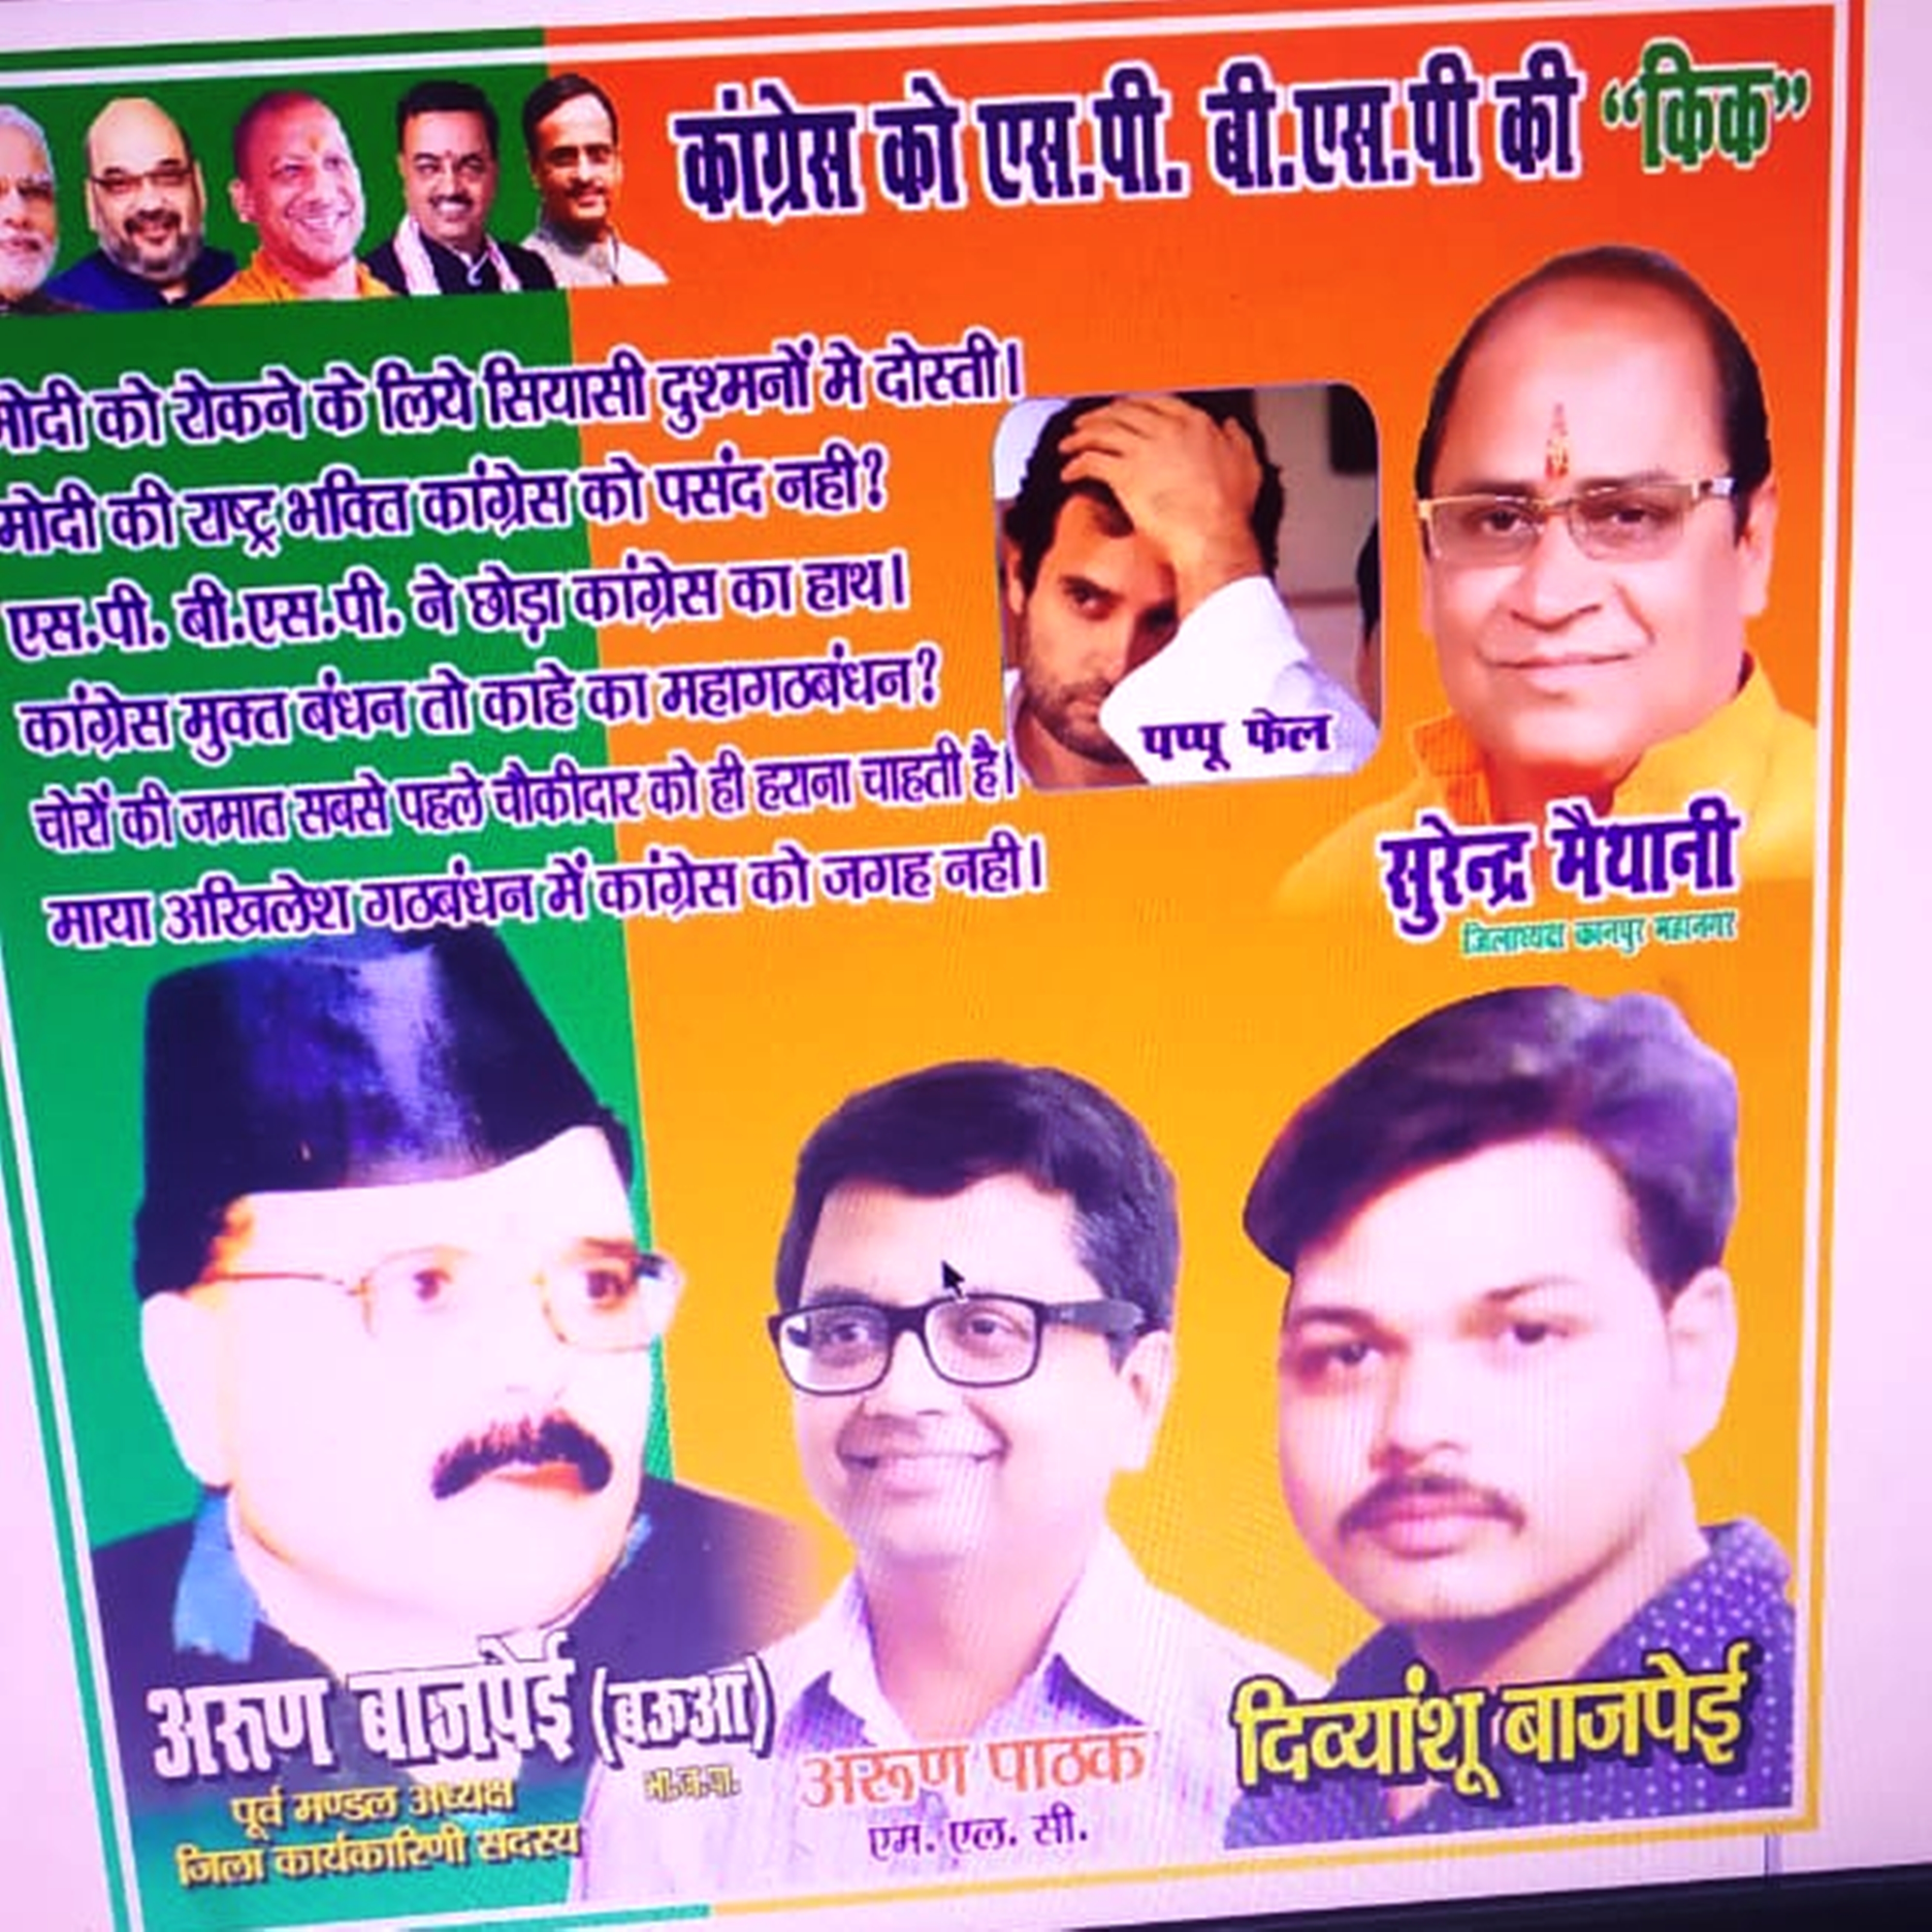 billboards before bjp attacked sp bsp and congress in kanpur